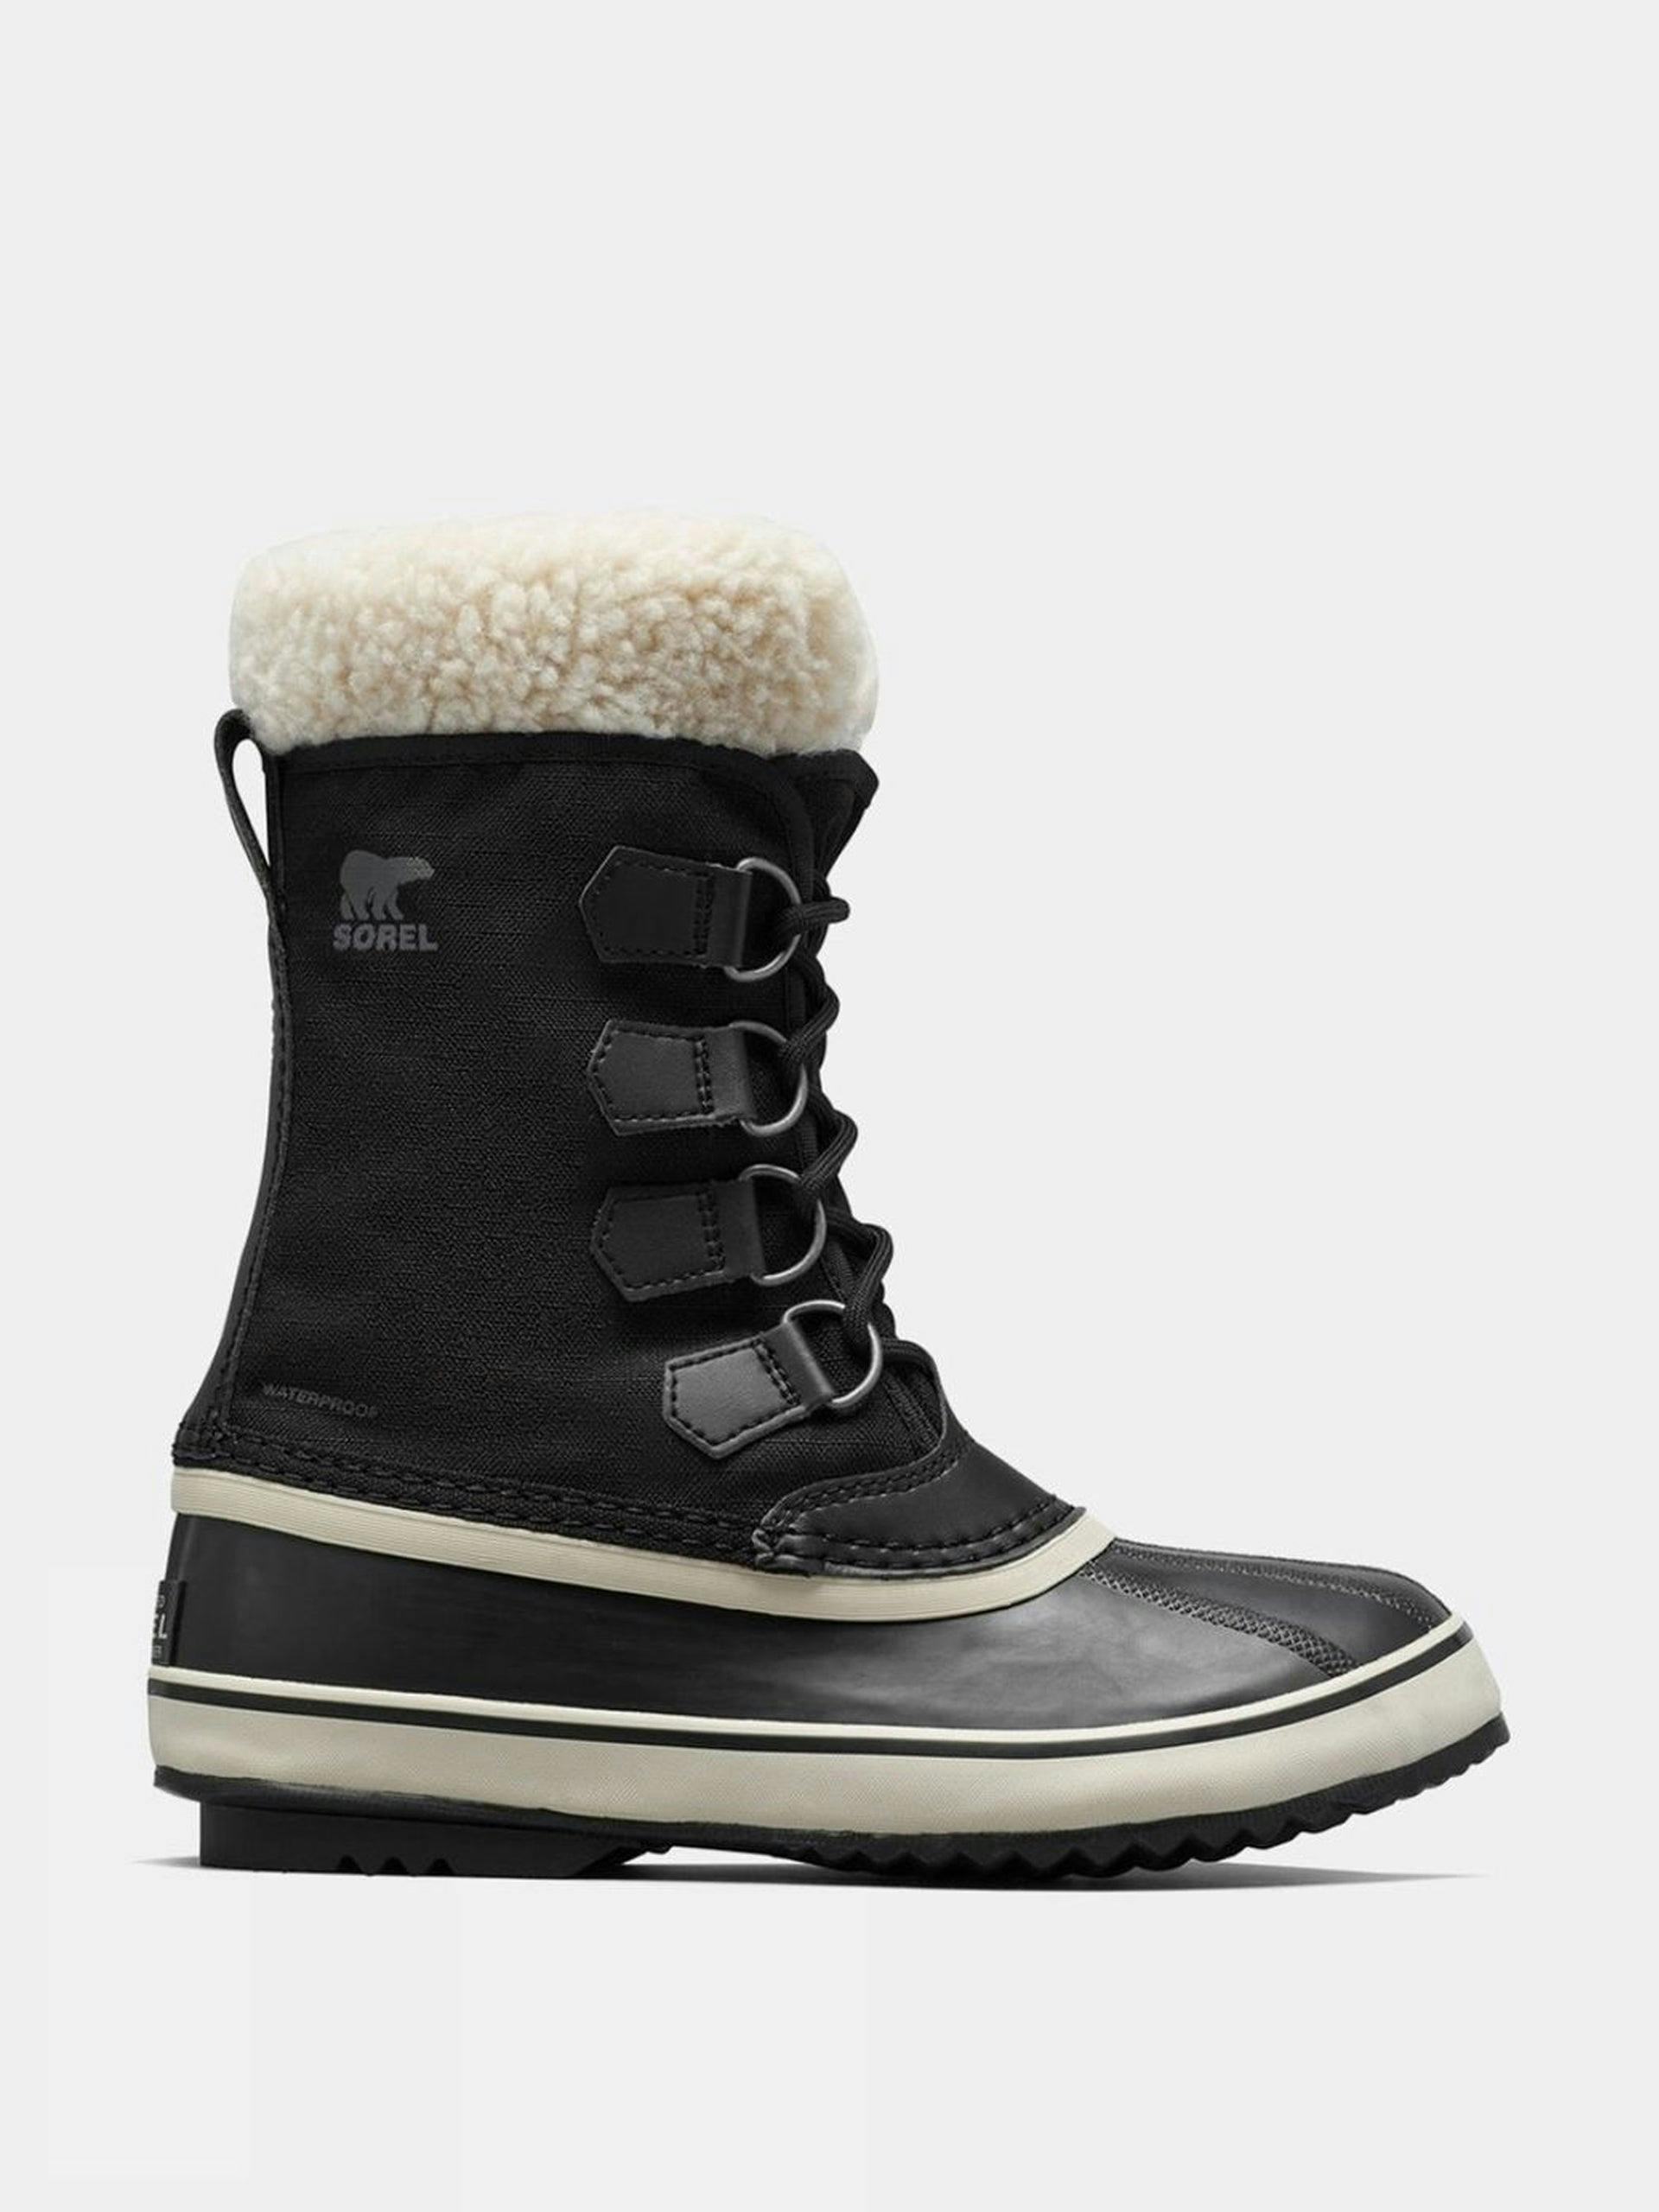 Mixed fabric and shearling black boots